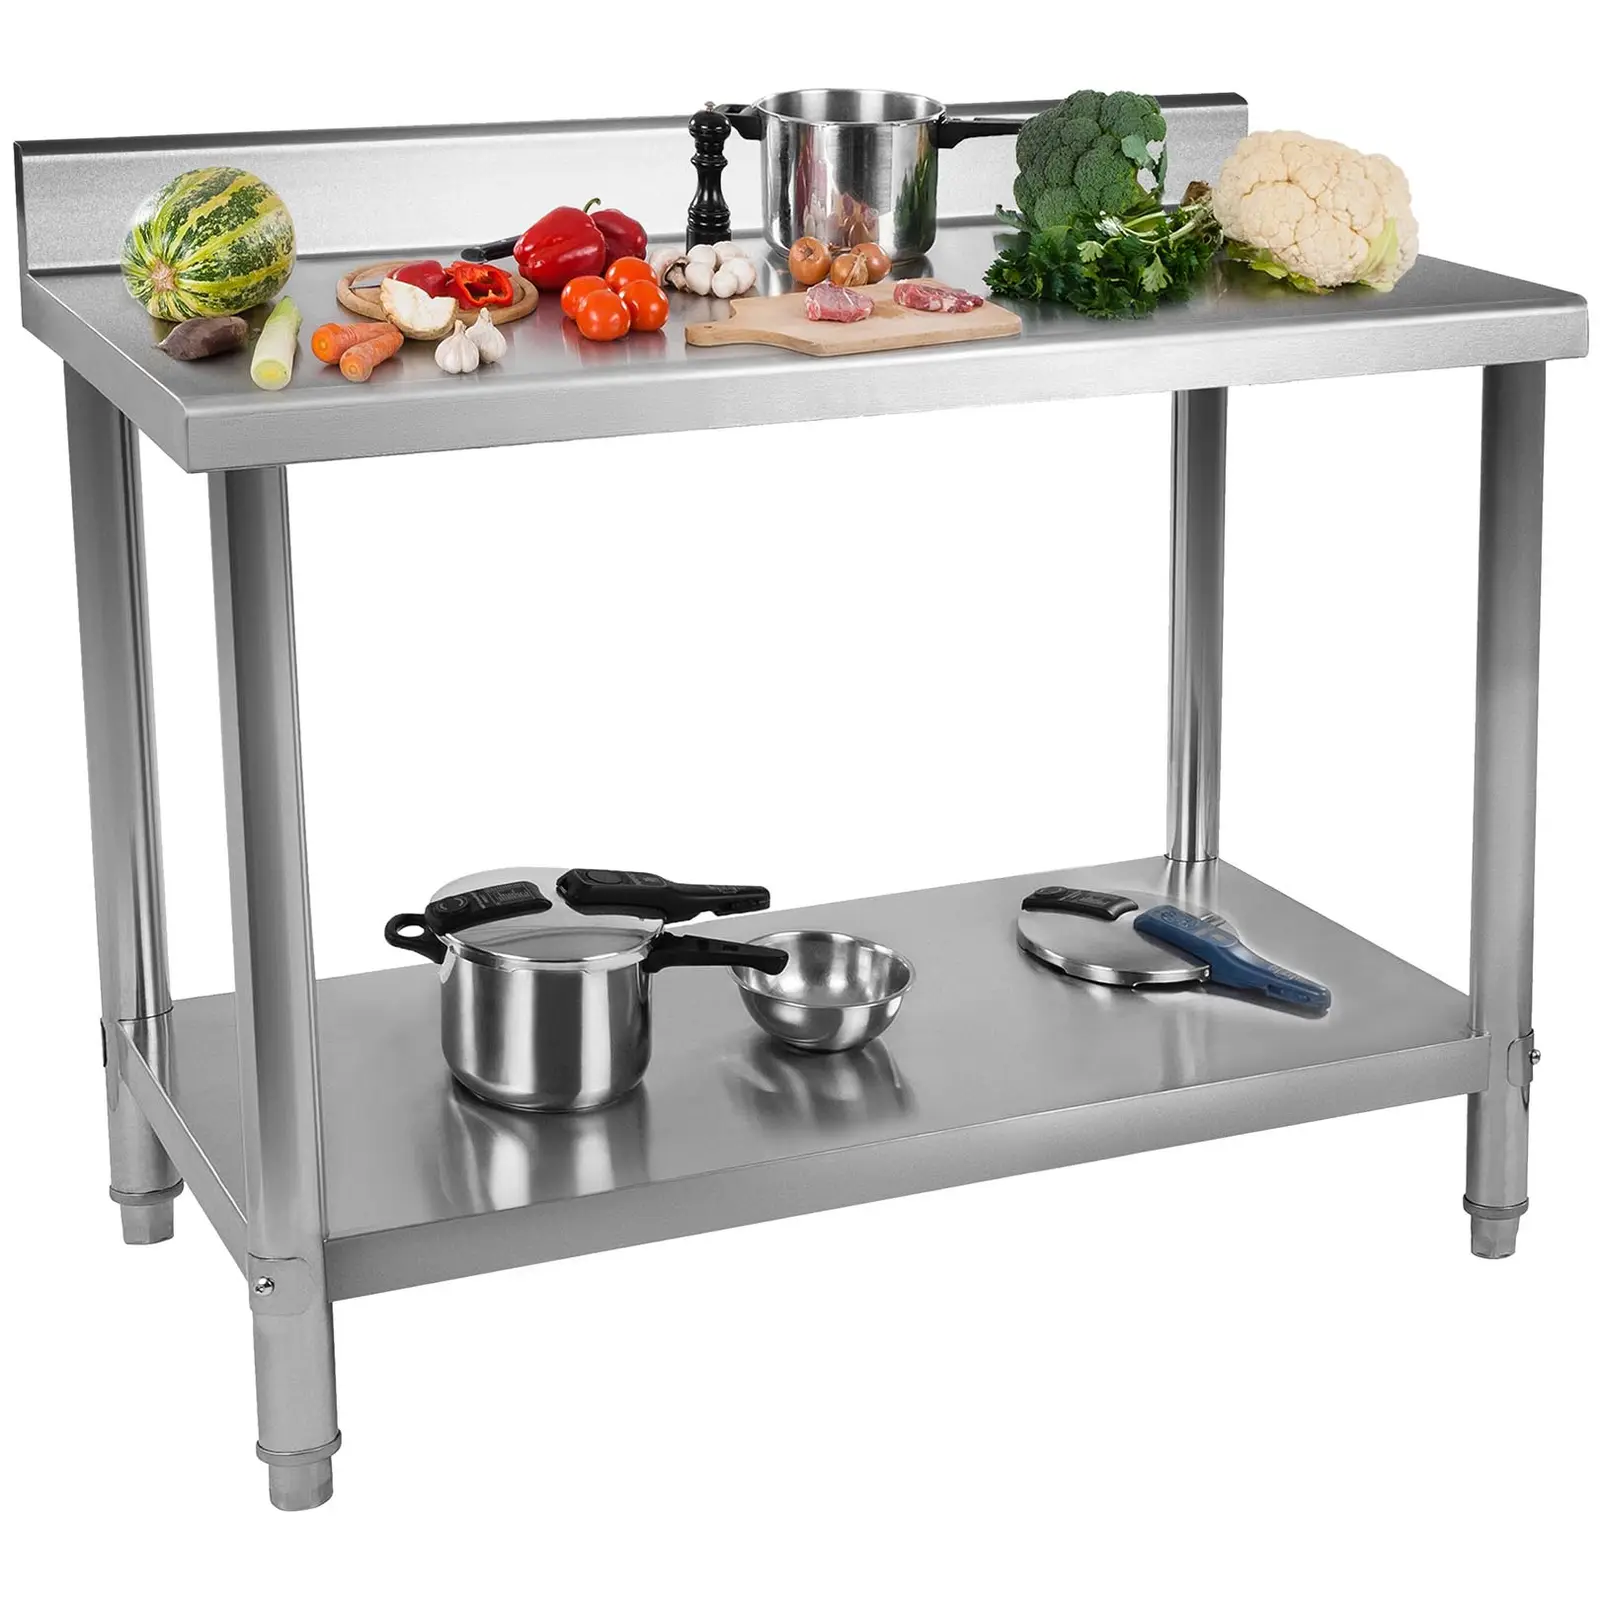 Stainless Steel Table - 100 x 60 cm - Upstand - 114 kg capacity